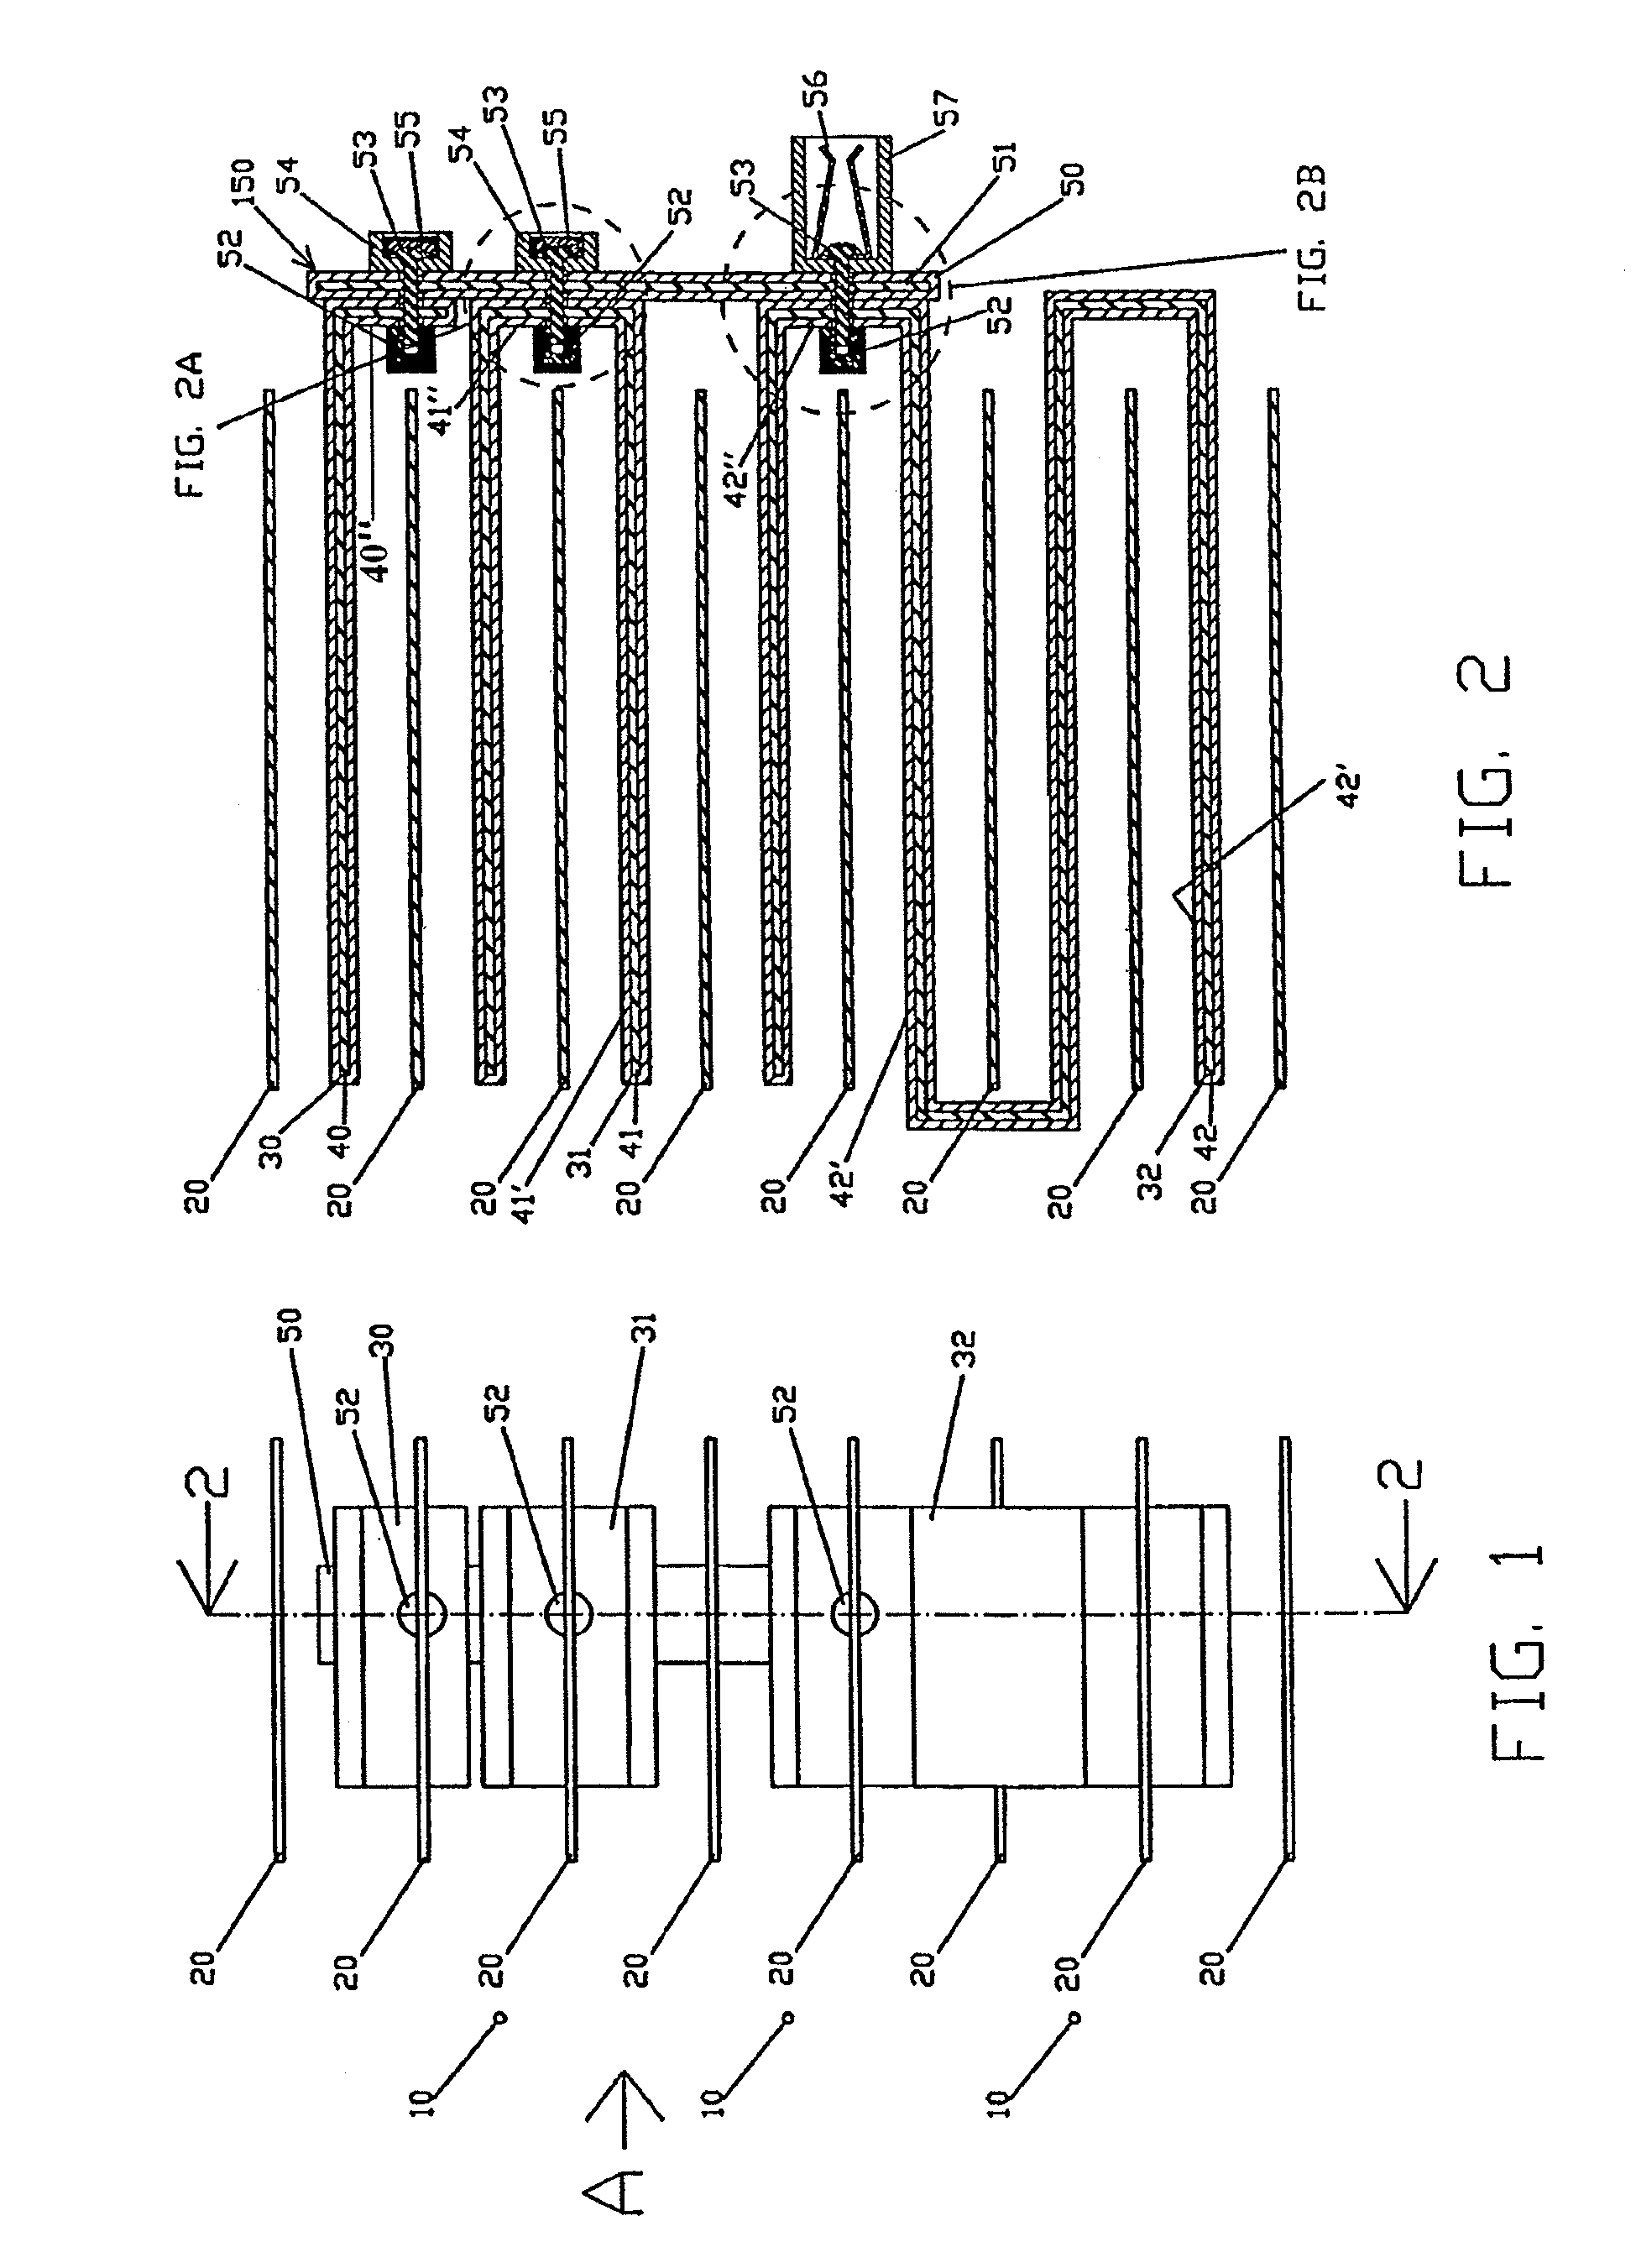 Collector modules for devices for removing particles from a gas